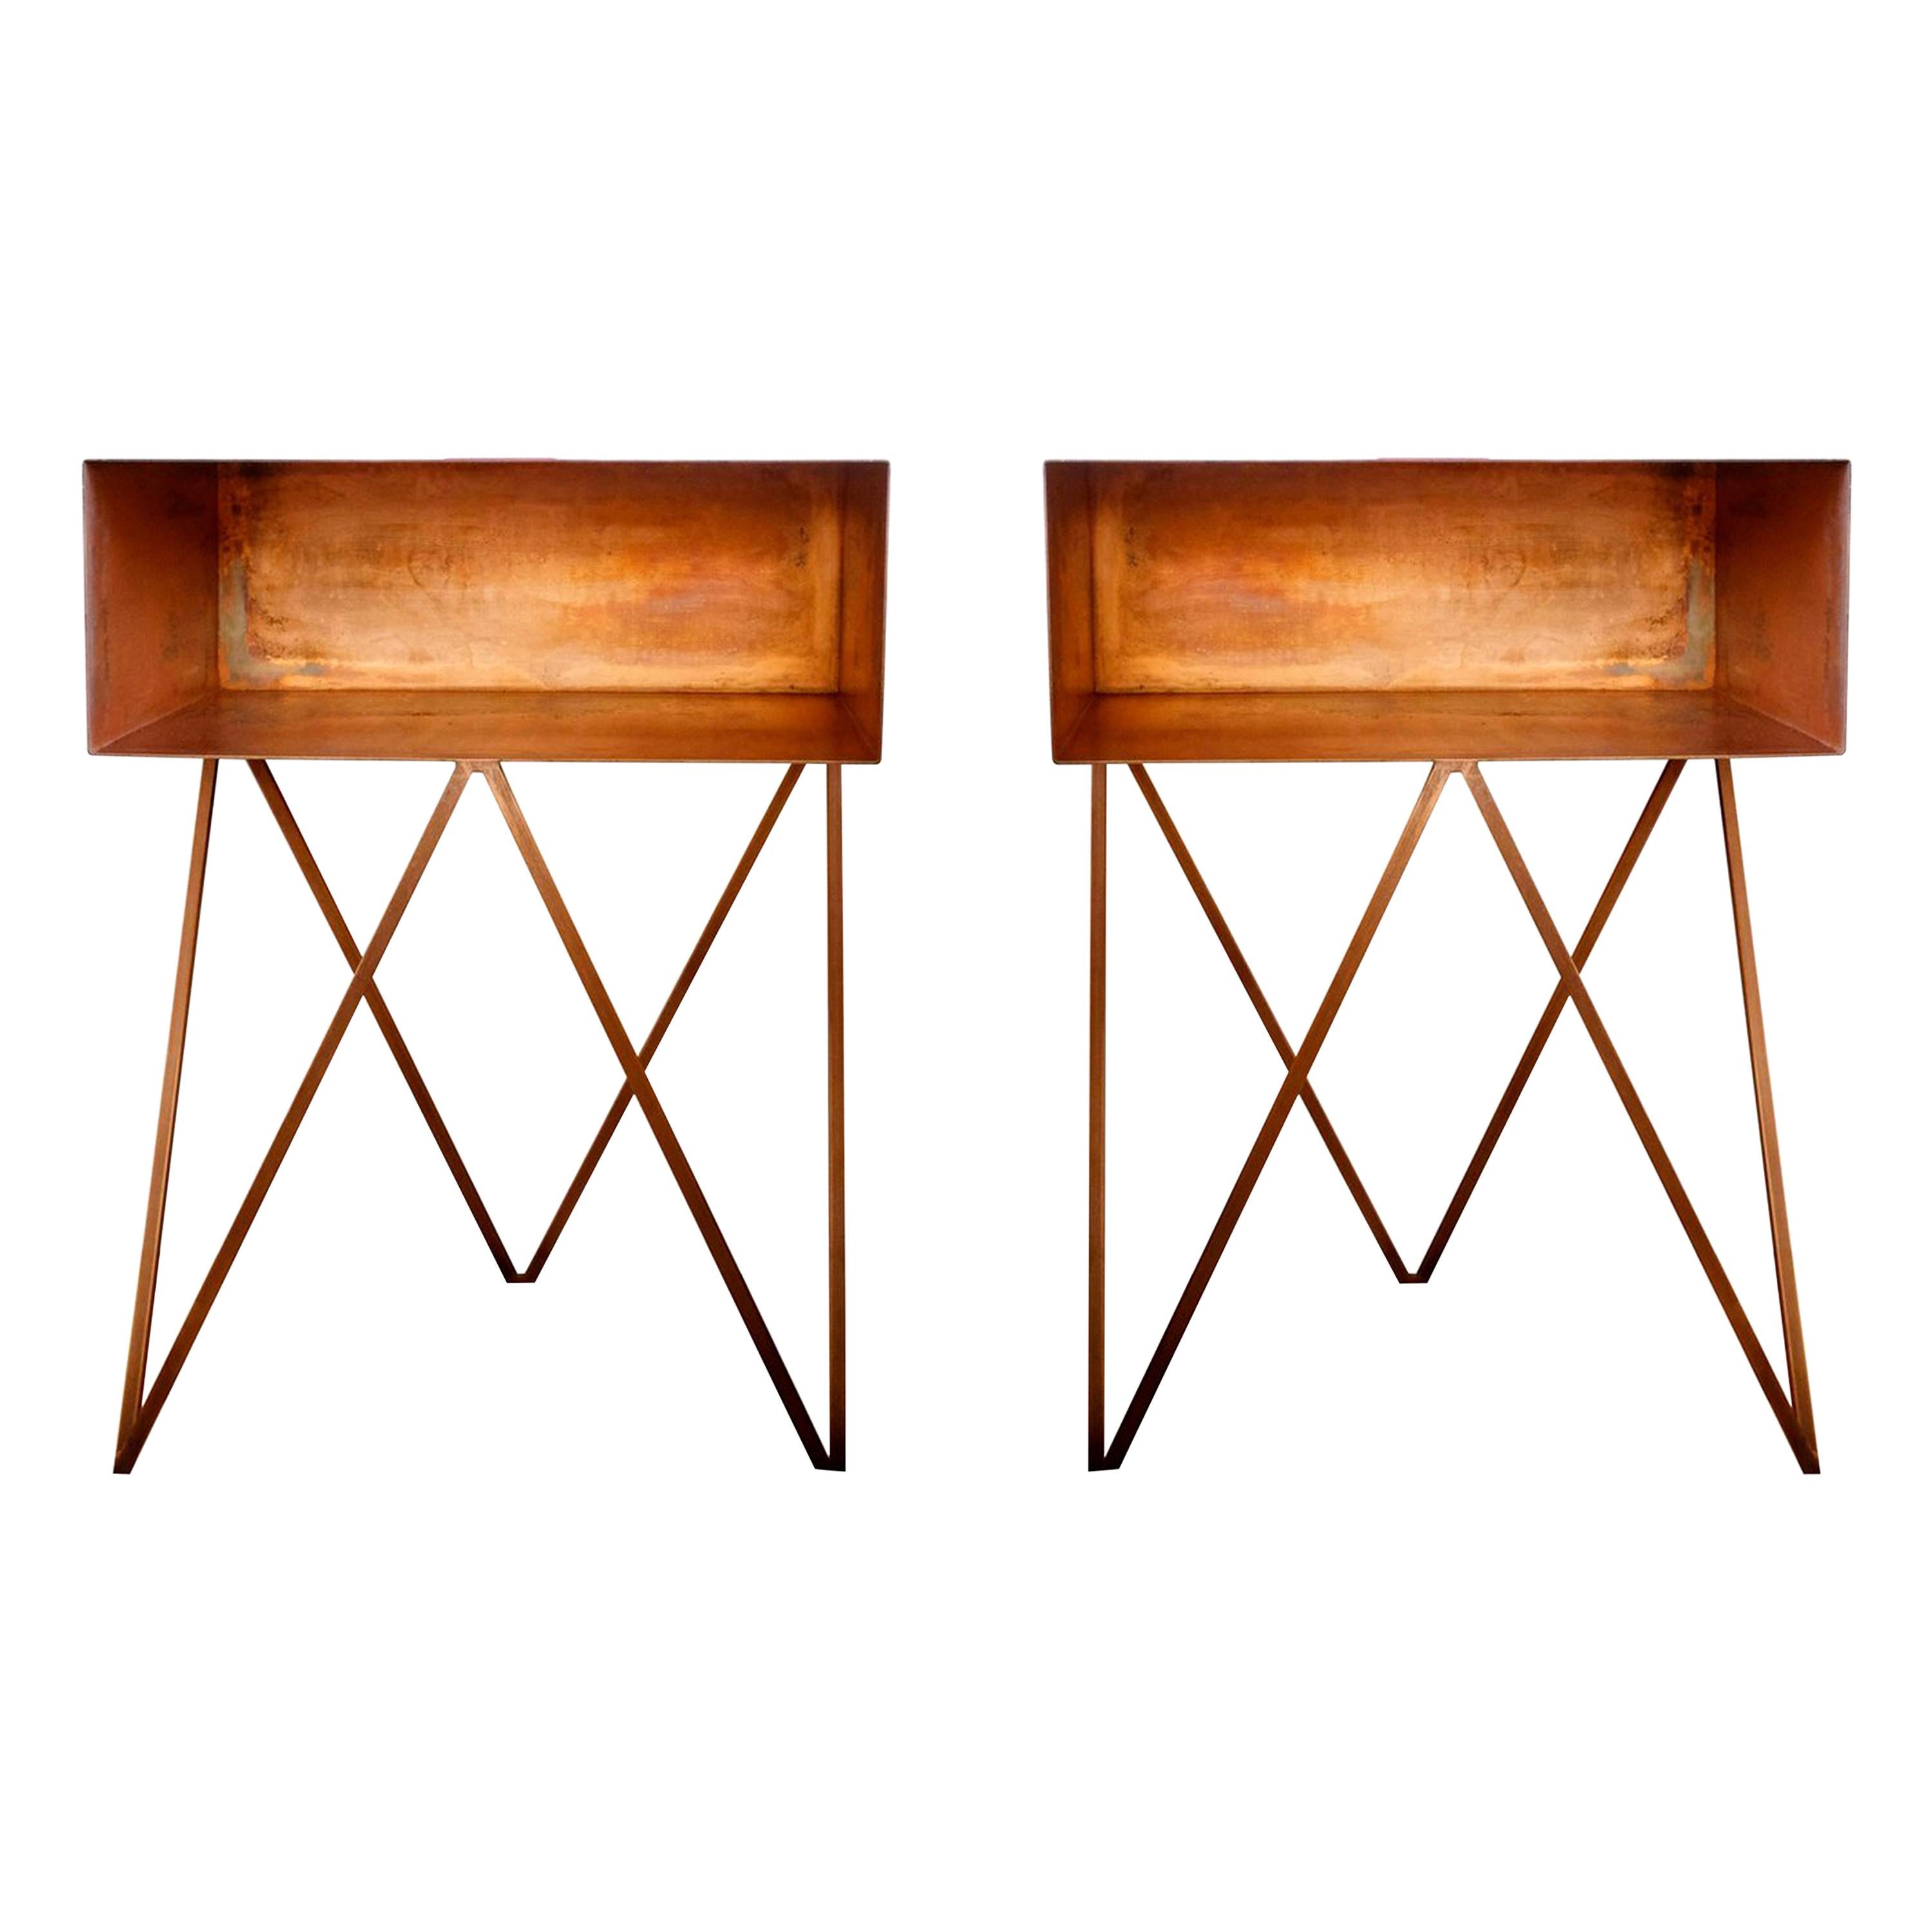 Pair of Luxury Oxidised Copper Robot Side Tables, End Tables, Bedside Tables